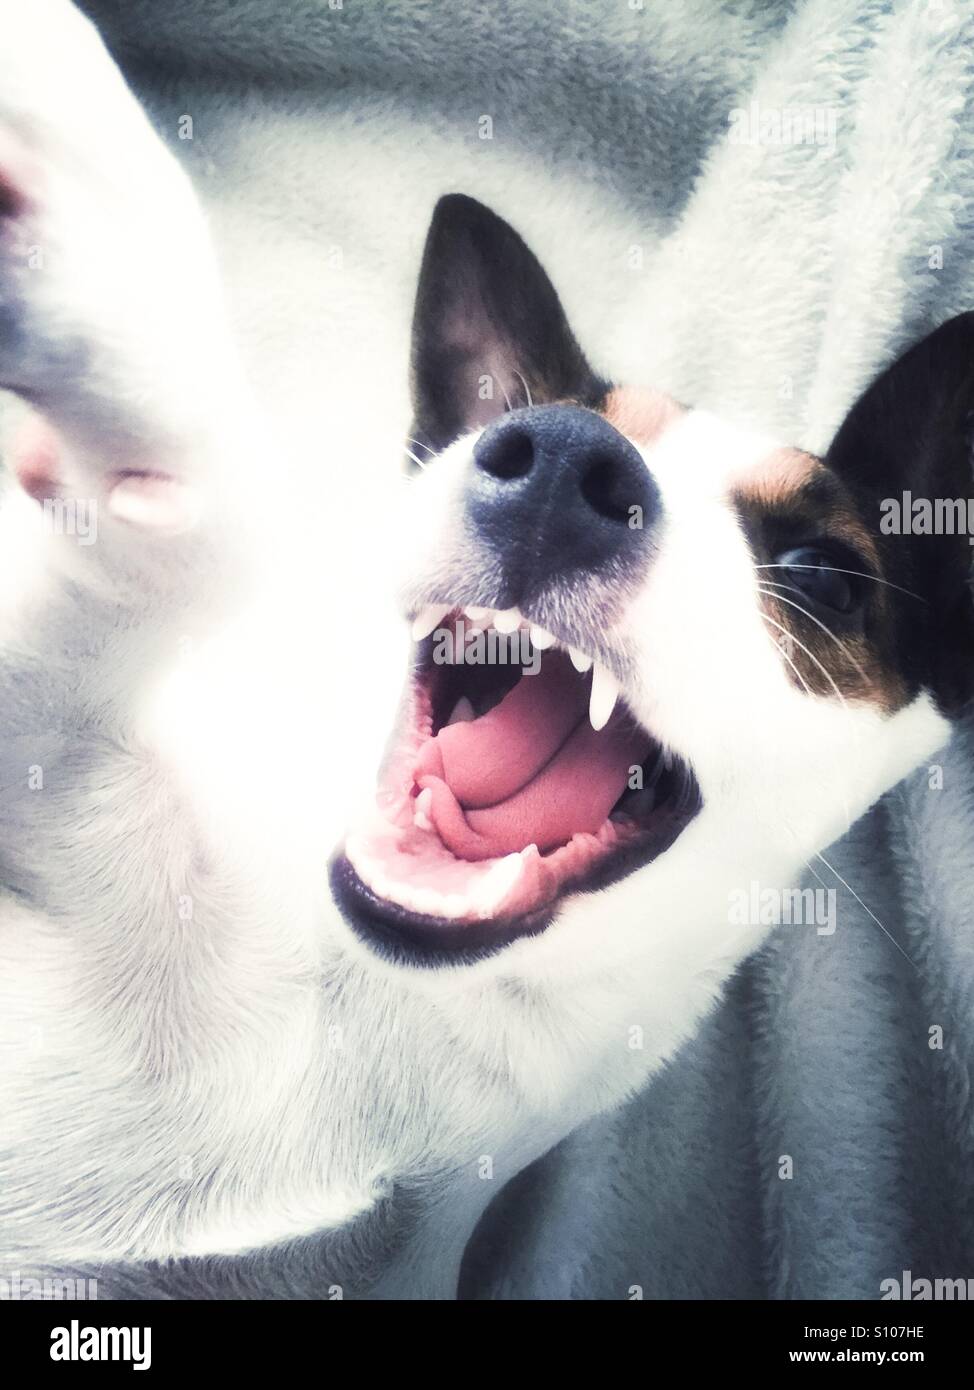 Close up of dog's face with mouth open and teeth showing. Stock Photo